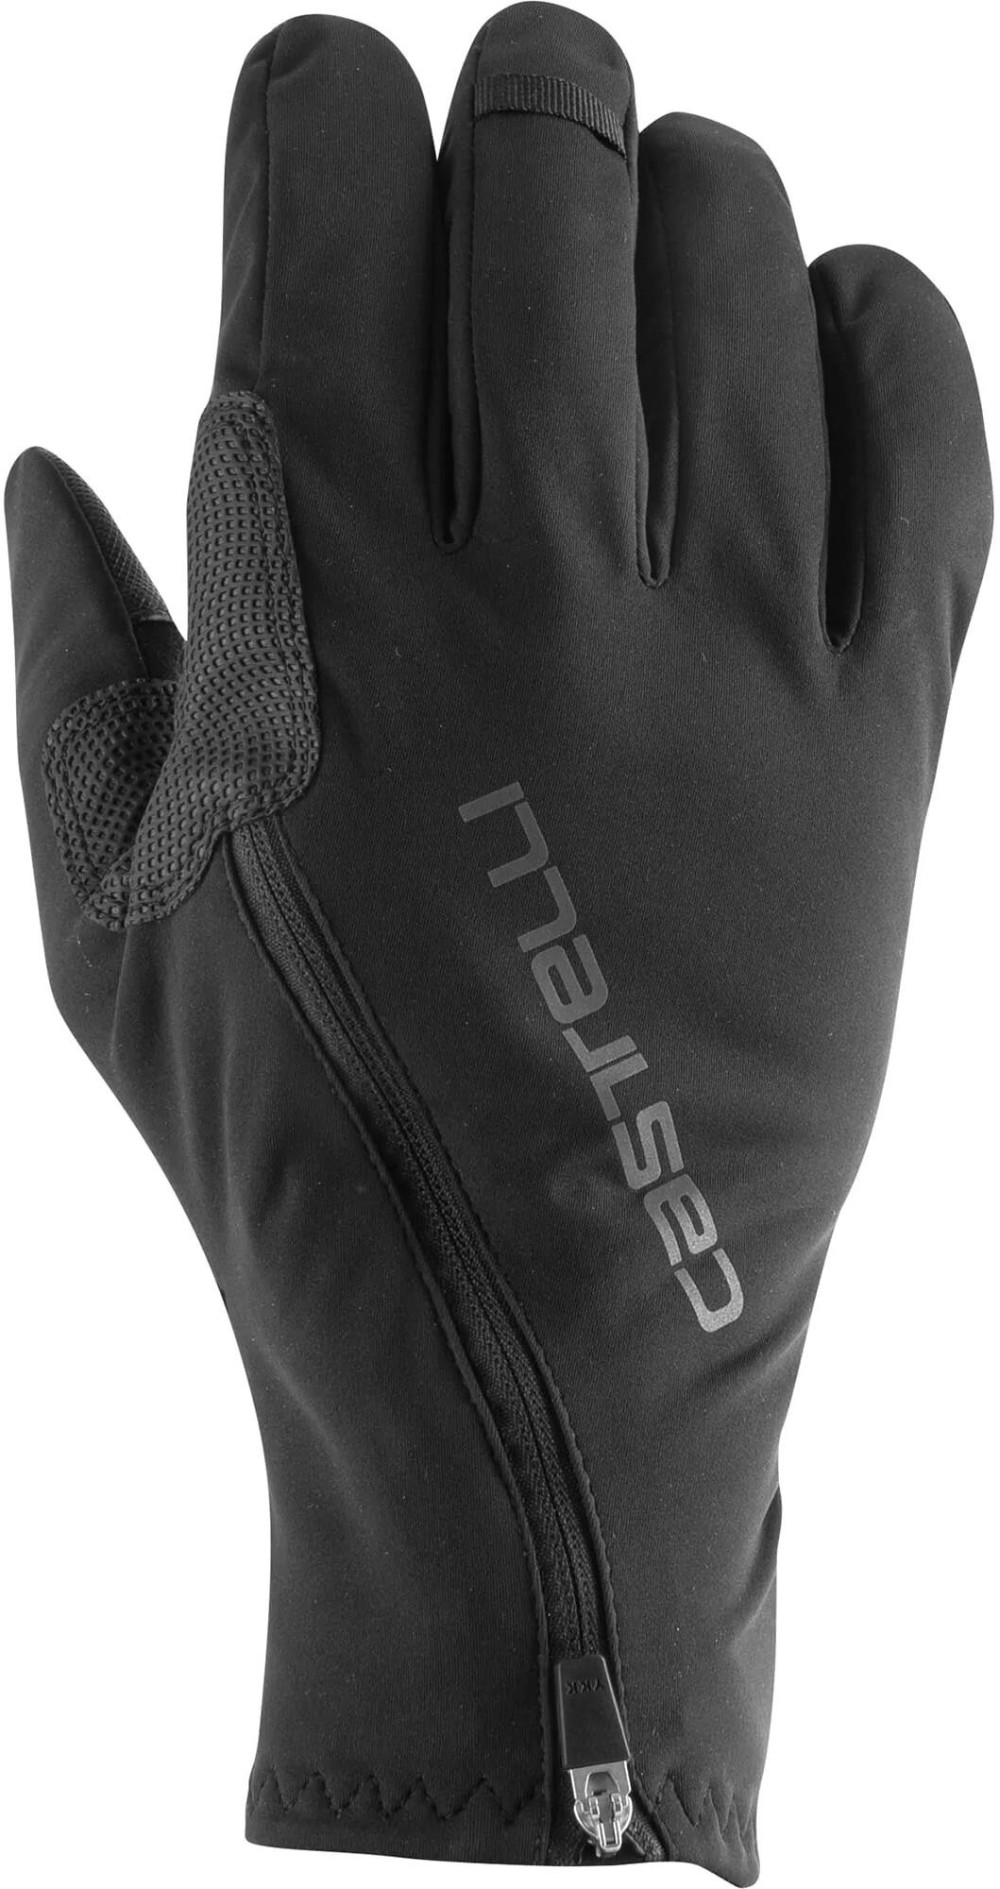 Spettacolo Ros Long Finger Cycling Gloves image 0